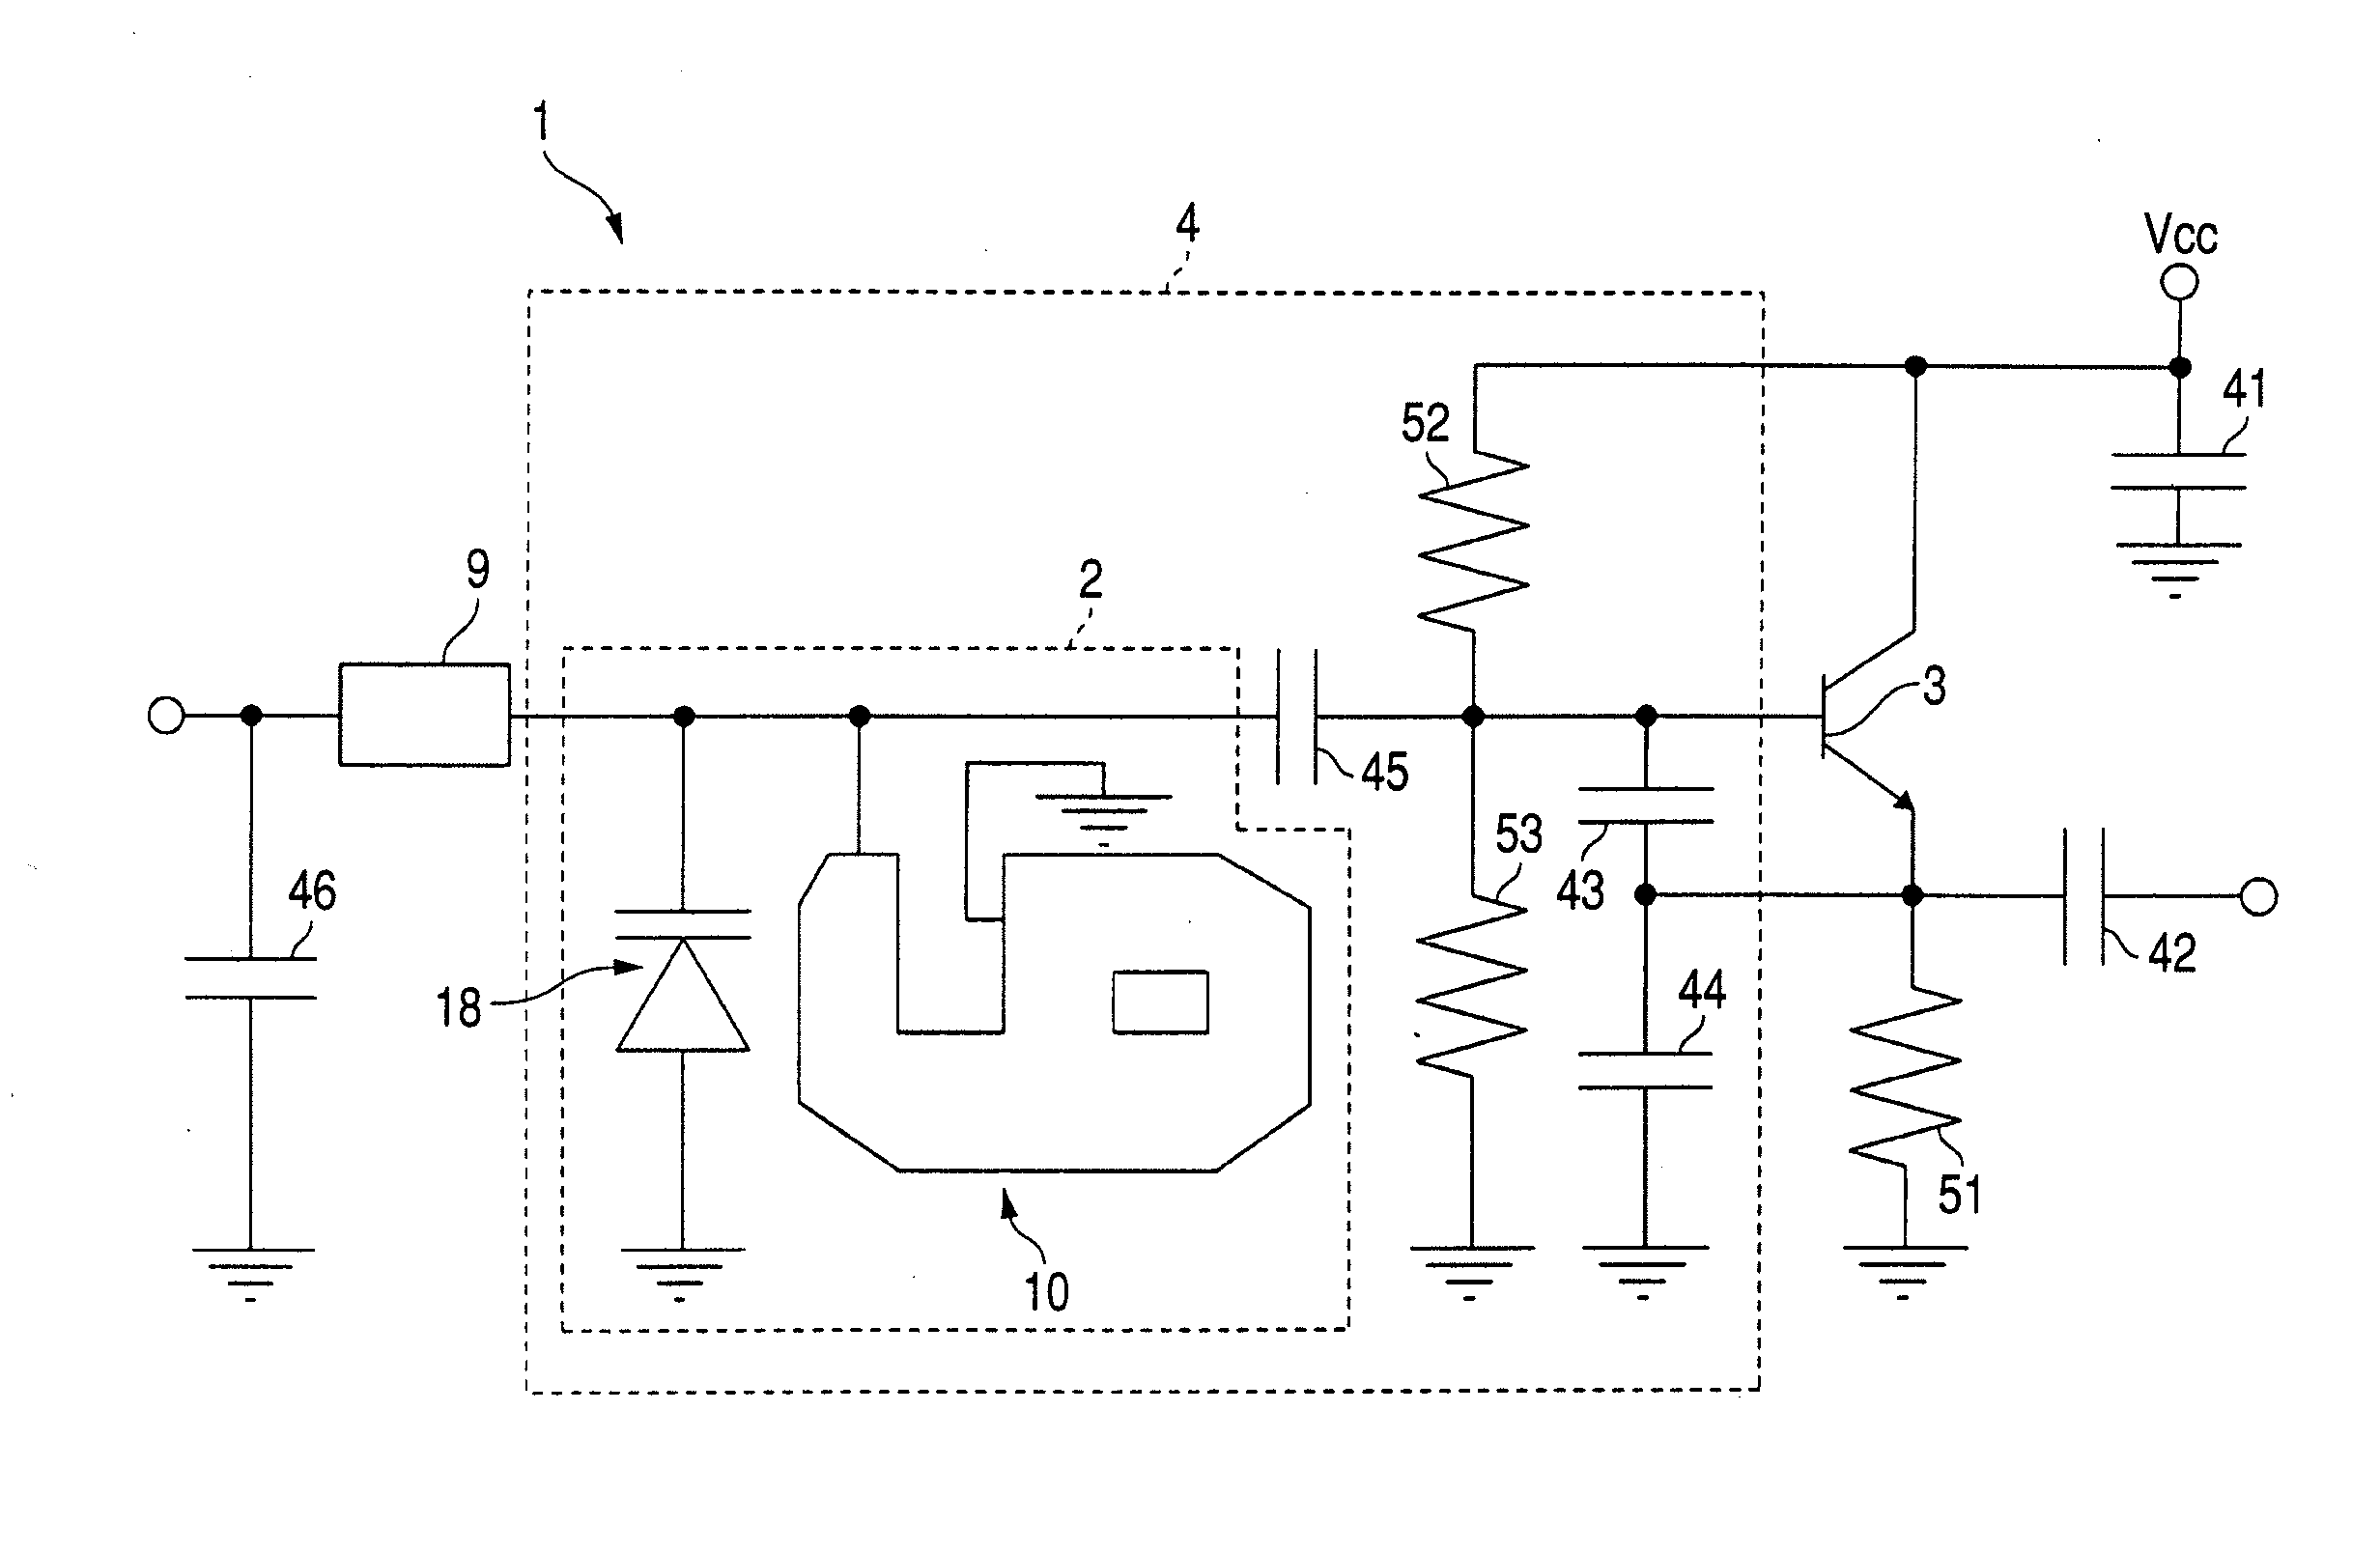 Voltage controlled oscillator with microstrip line suitable for coarse adjustment of oscillation frequency band